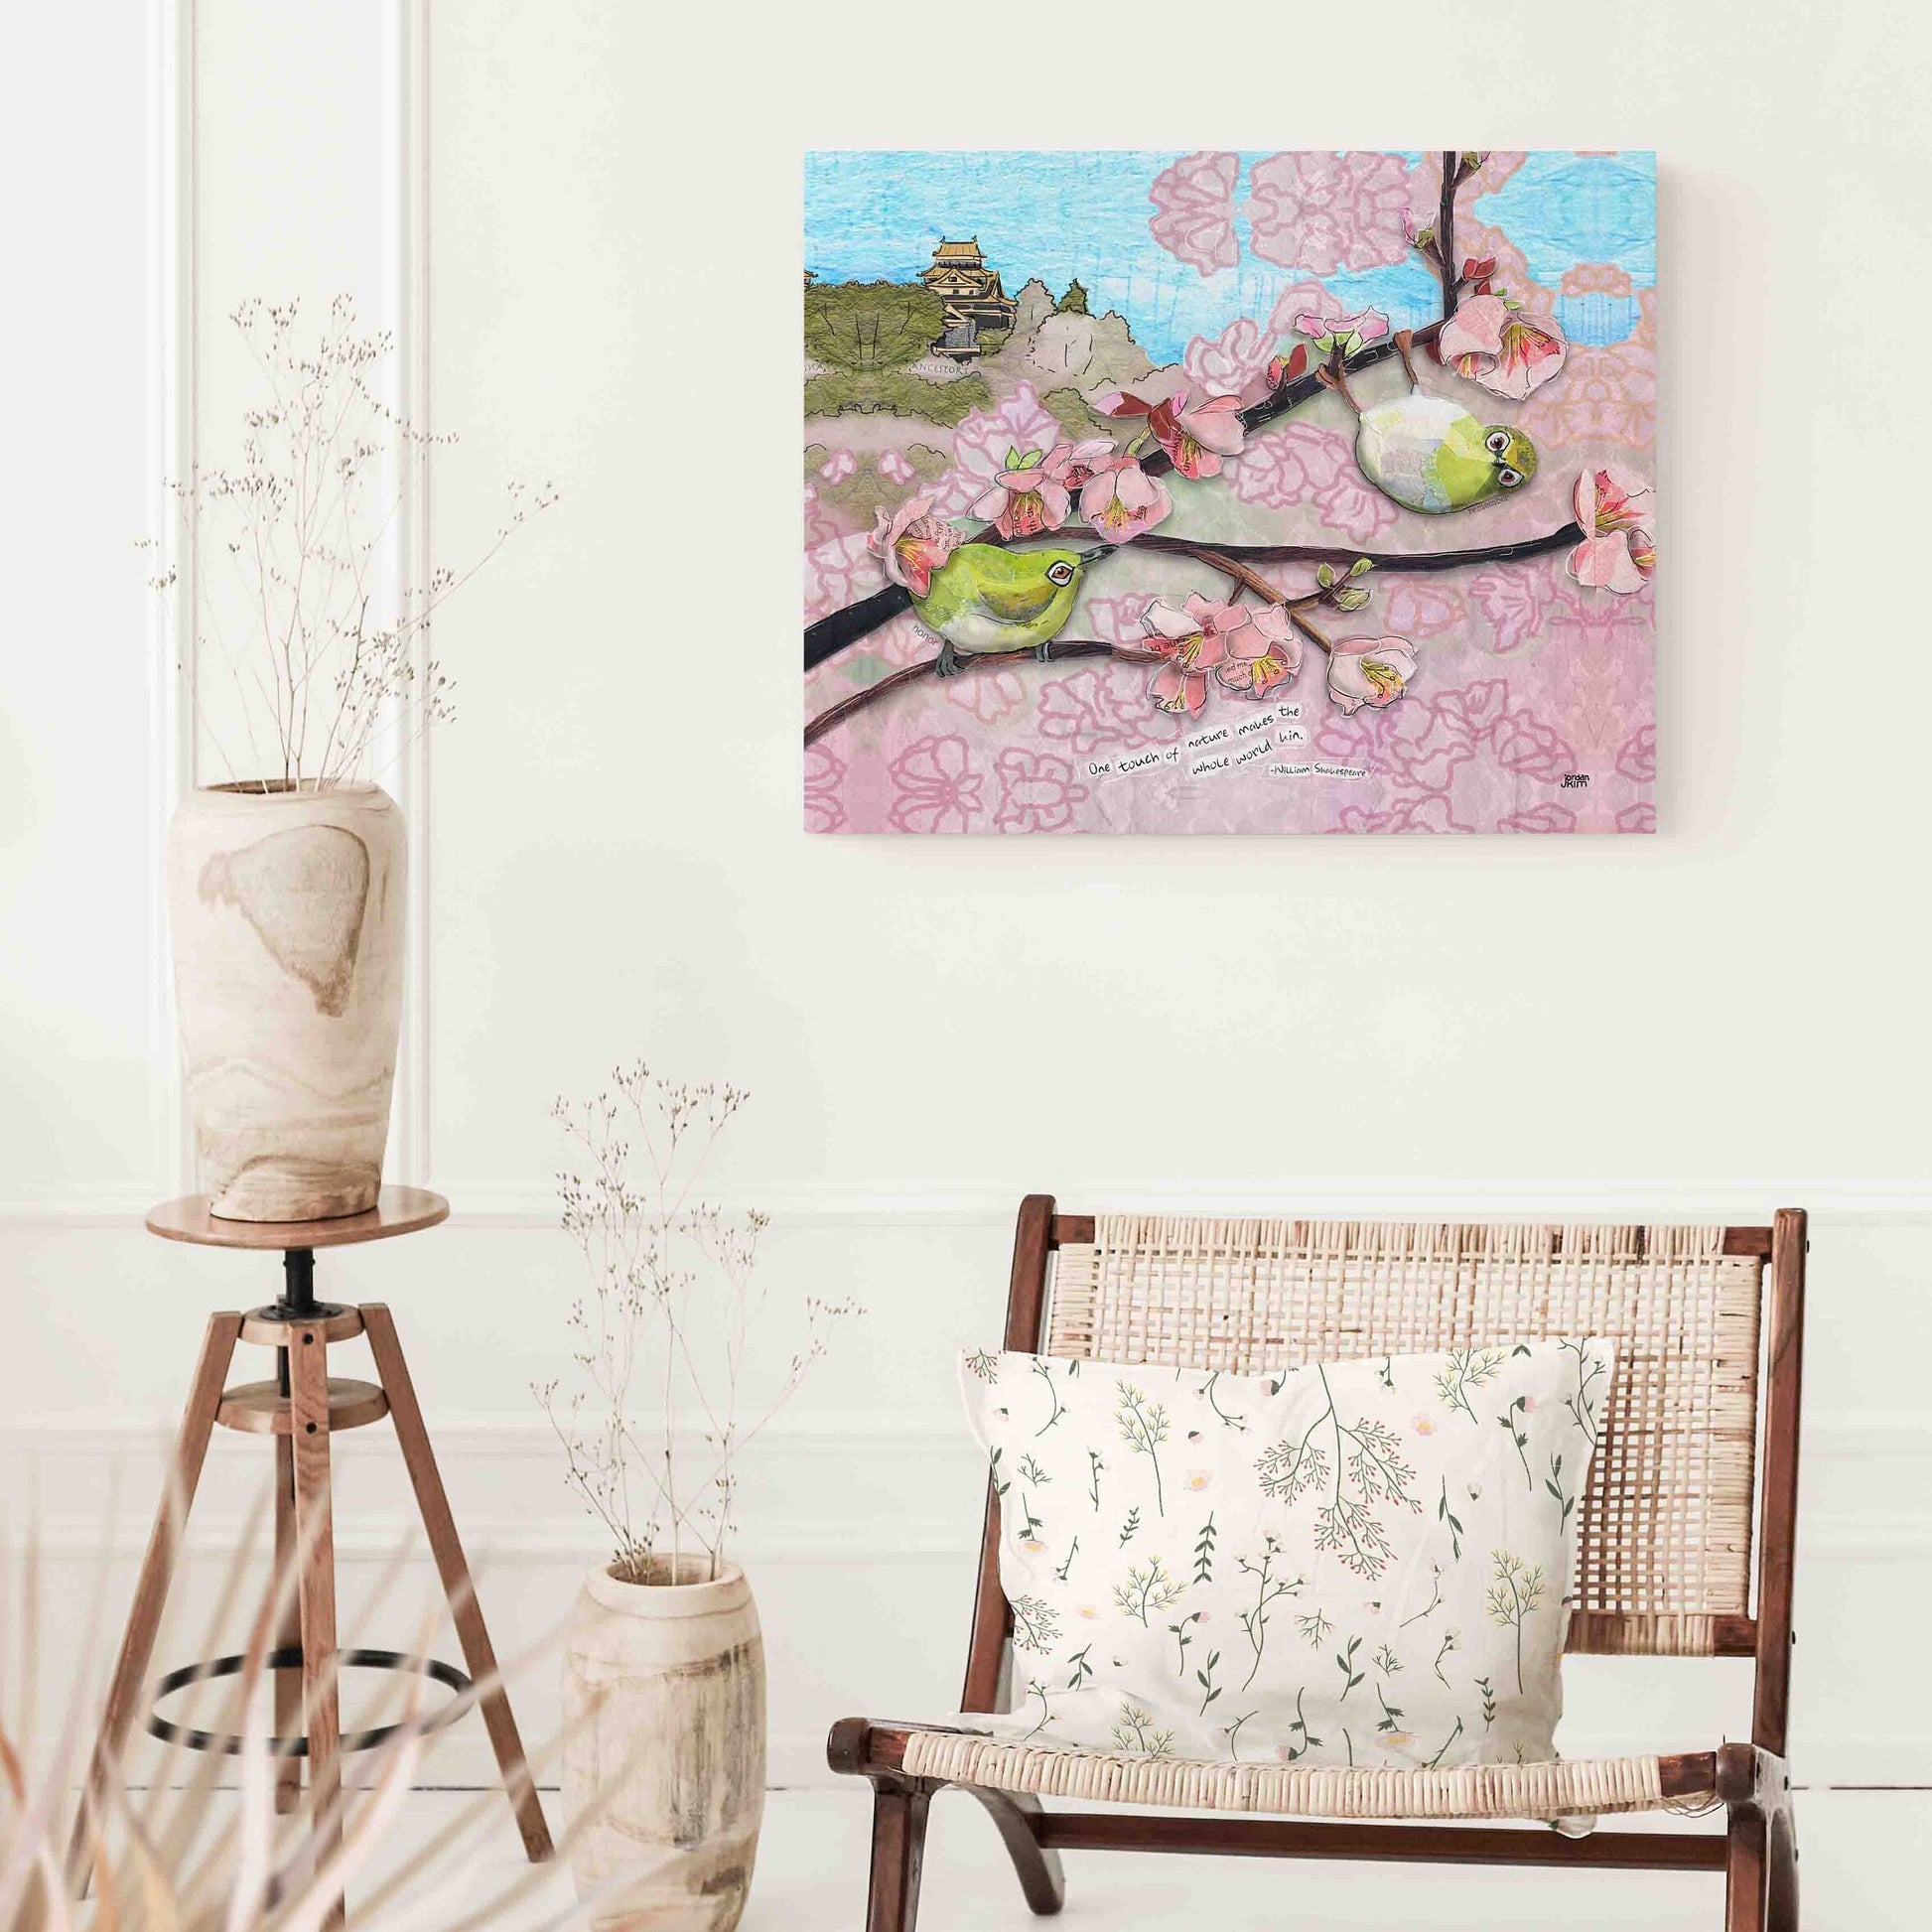 20"x16"x 1.5" Wrapped Canvas Printof a mixed media collage of Japanese White-Eye birds in sakura cherry blossoms, temple, Shakespeare quote